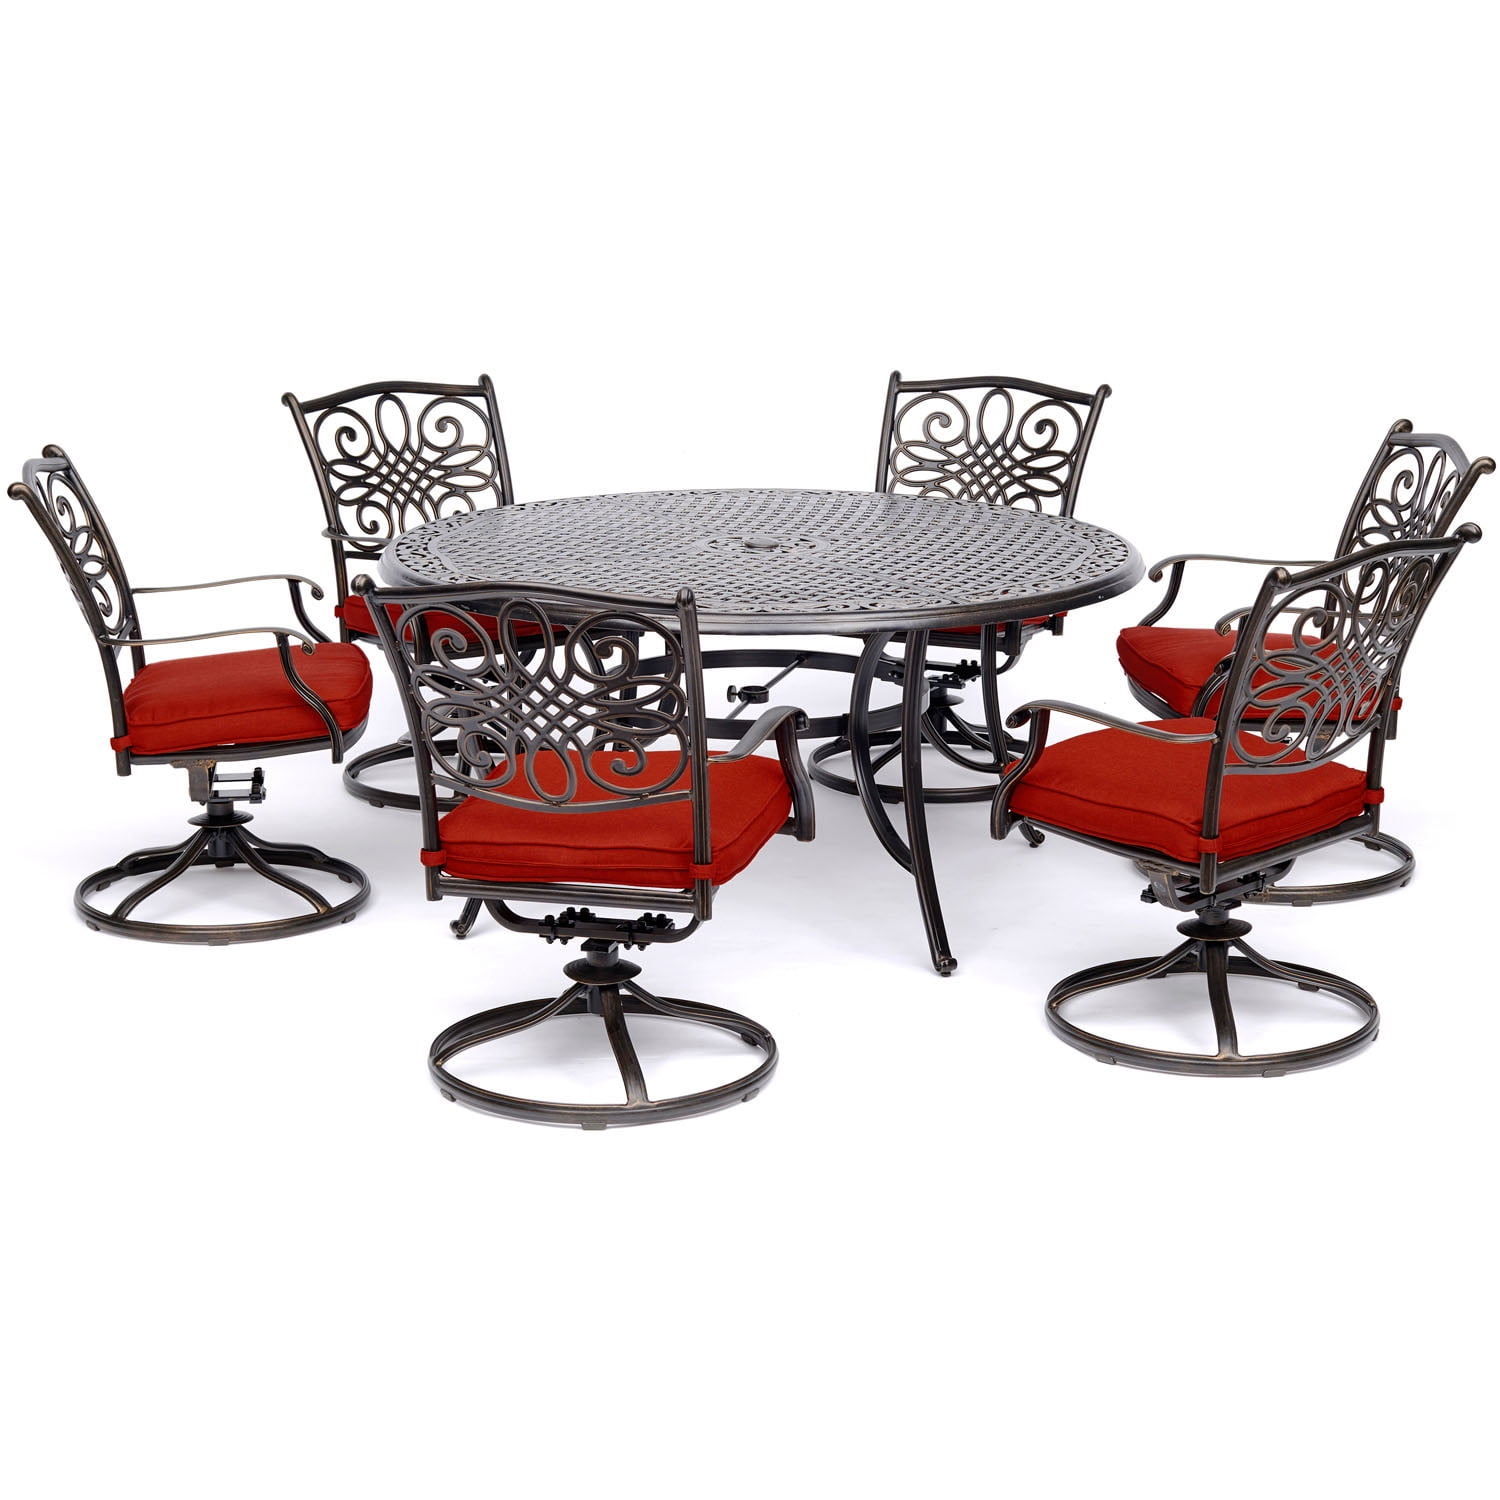 Hanover Traditions 7 Piece Outdoor, Round Outdoor Dining Table For 6 With Swivel Chairs